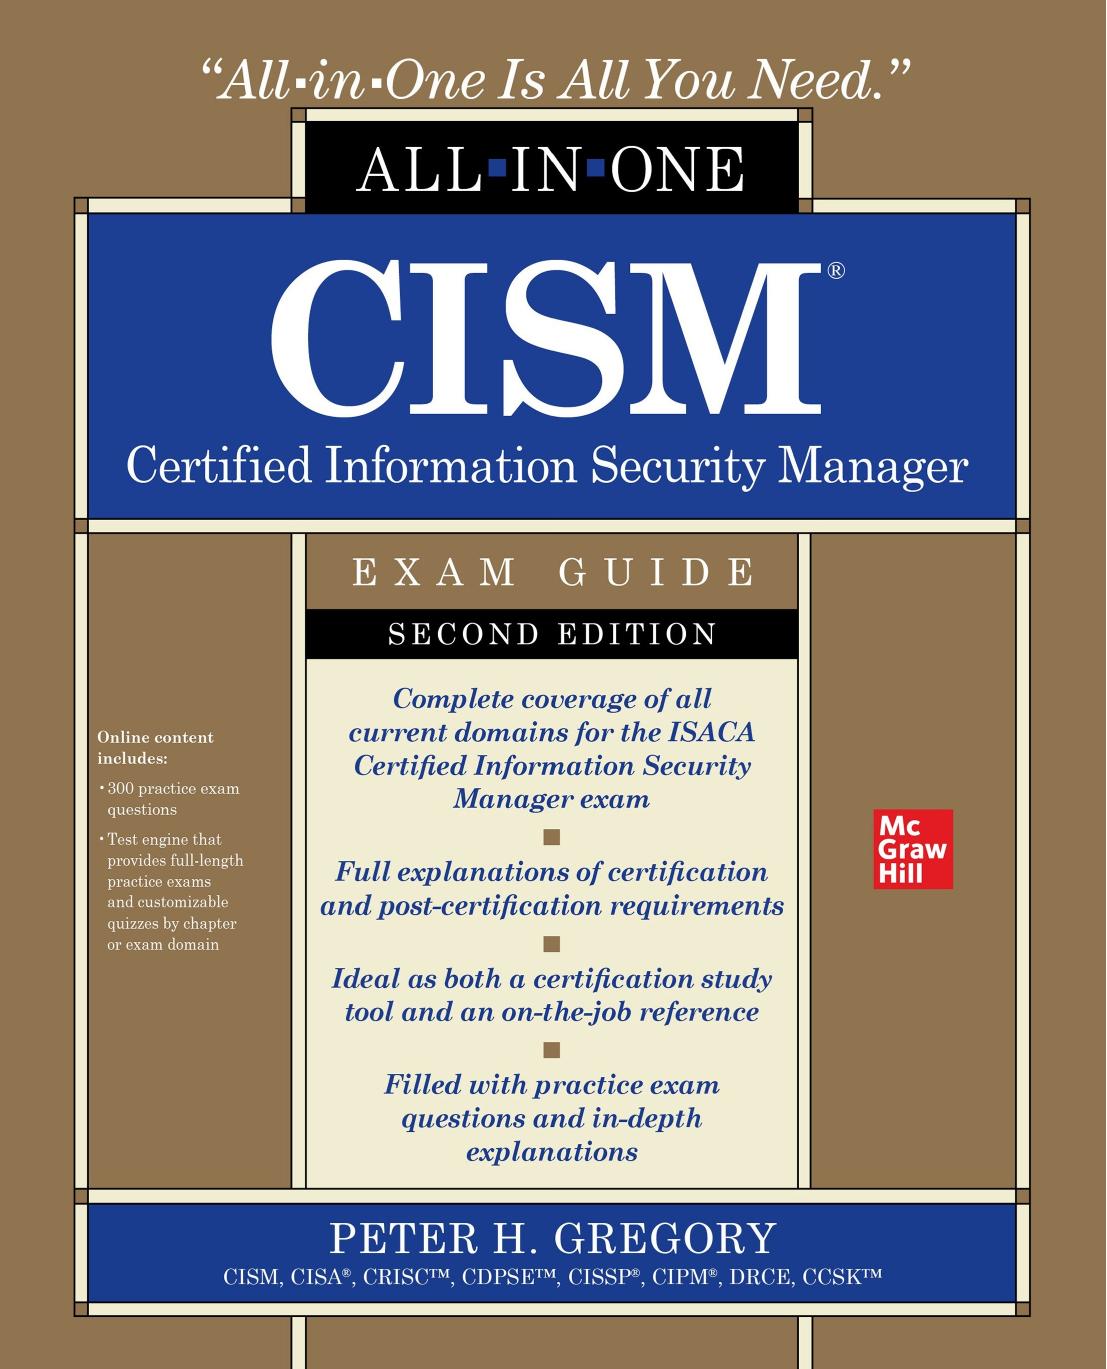 CISM Certified Information Security Manager. Exam Guide by Peter H. Gregory